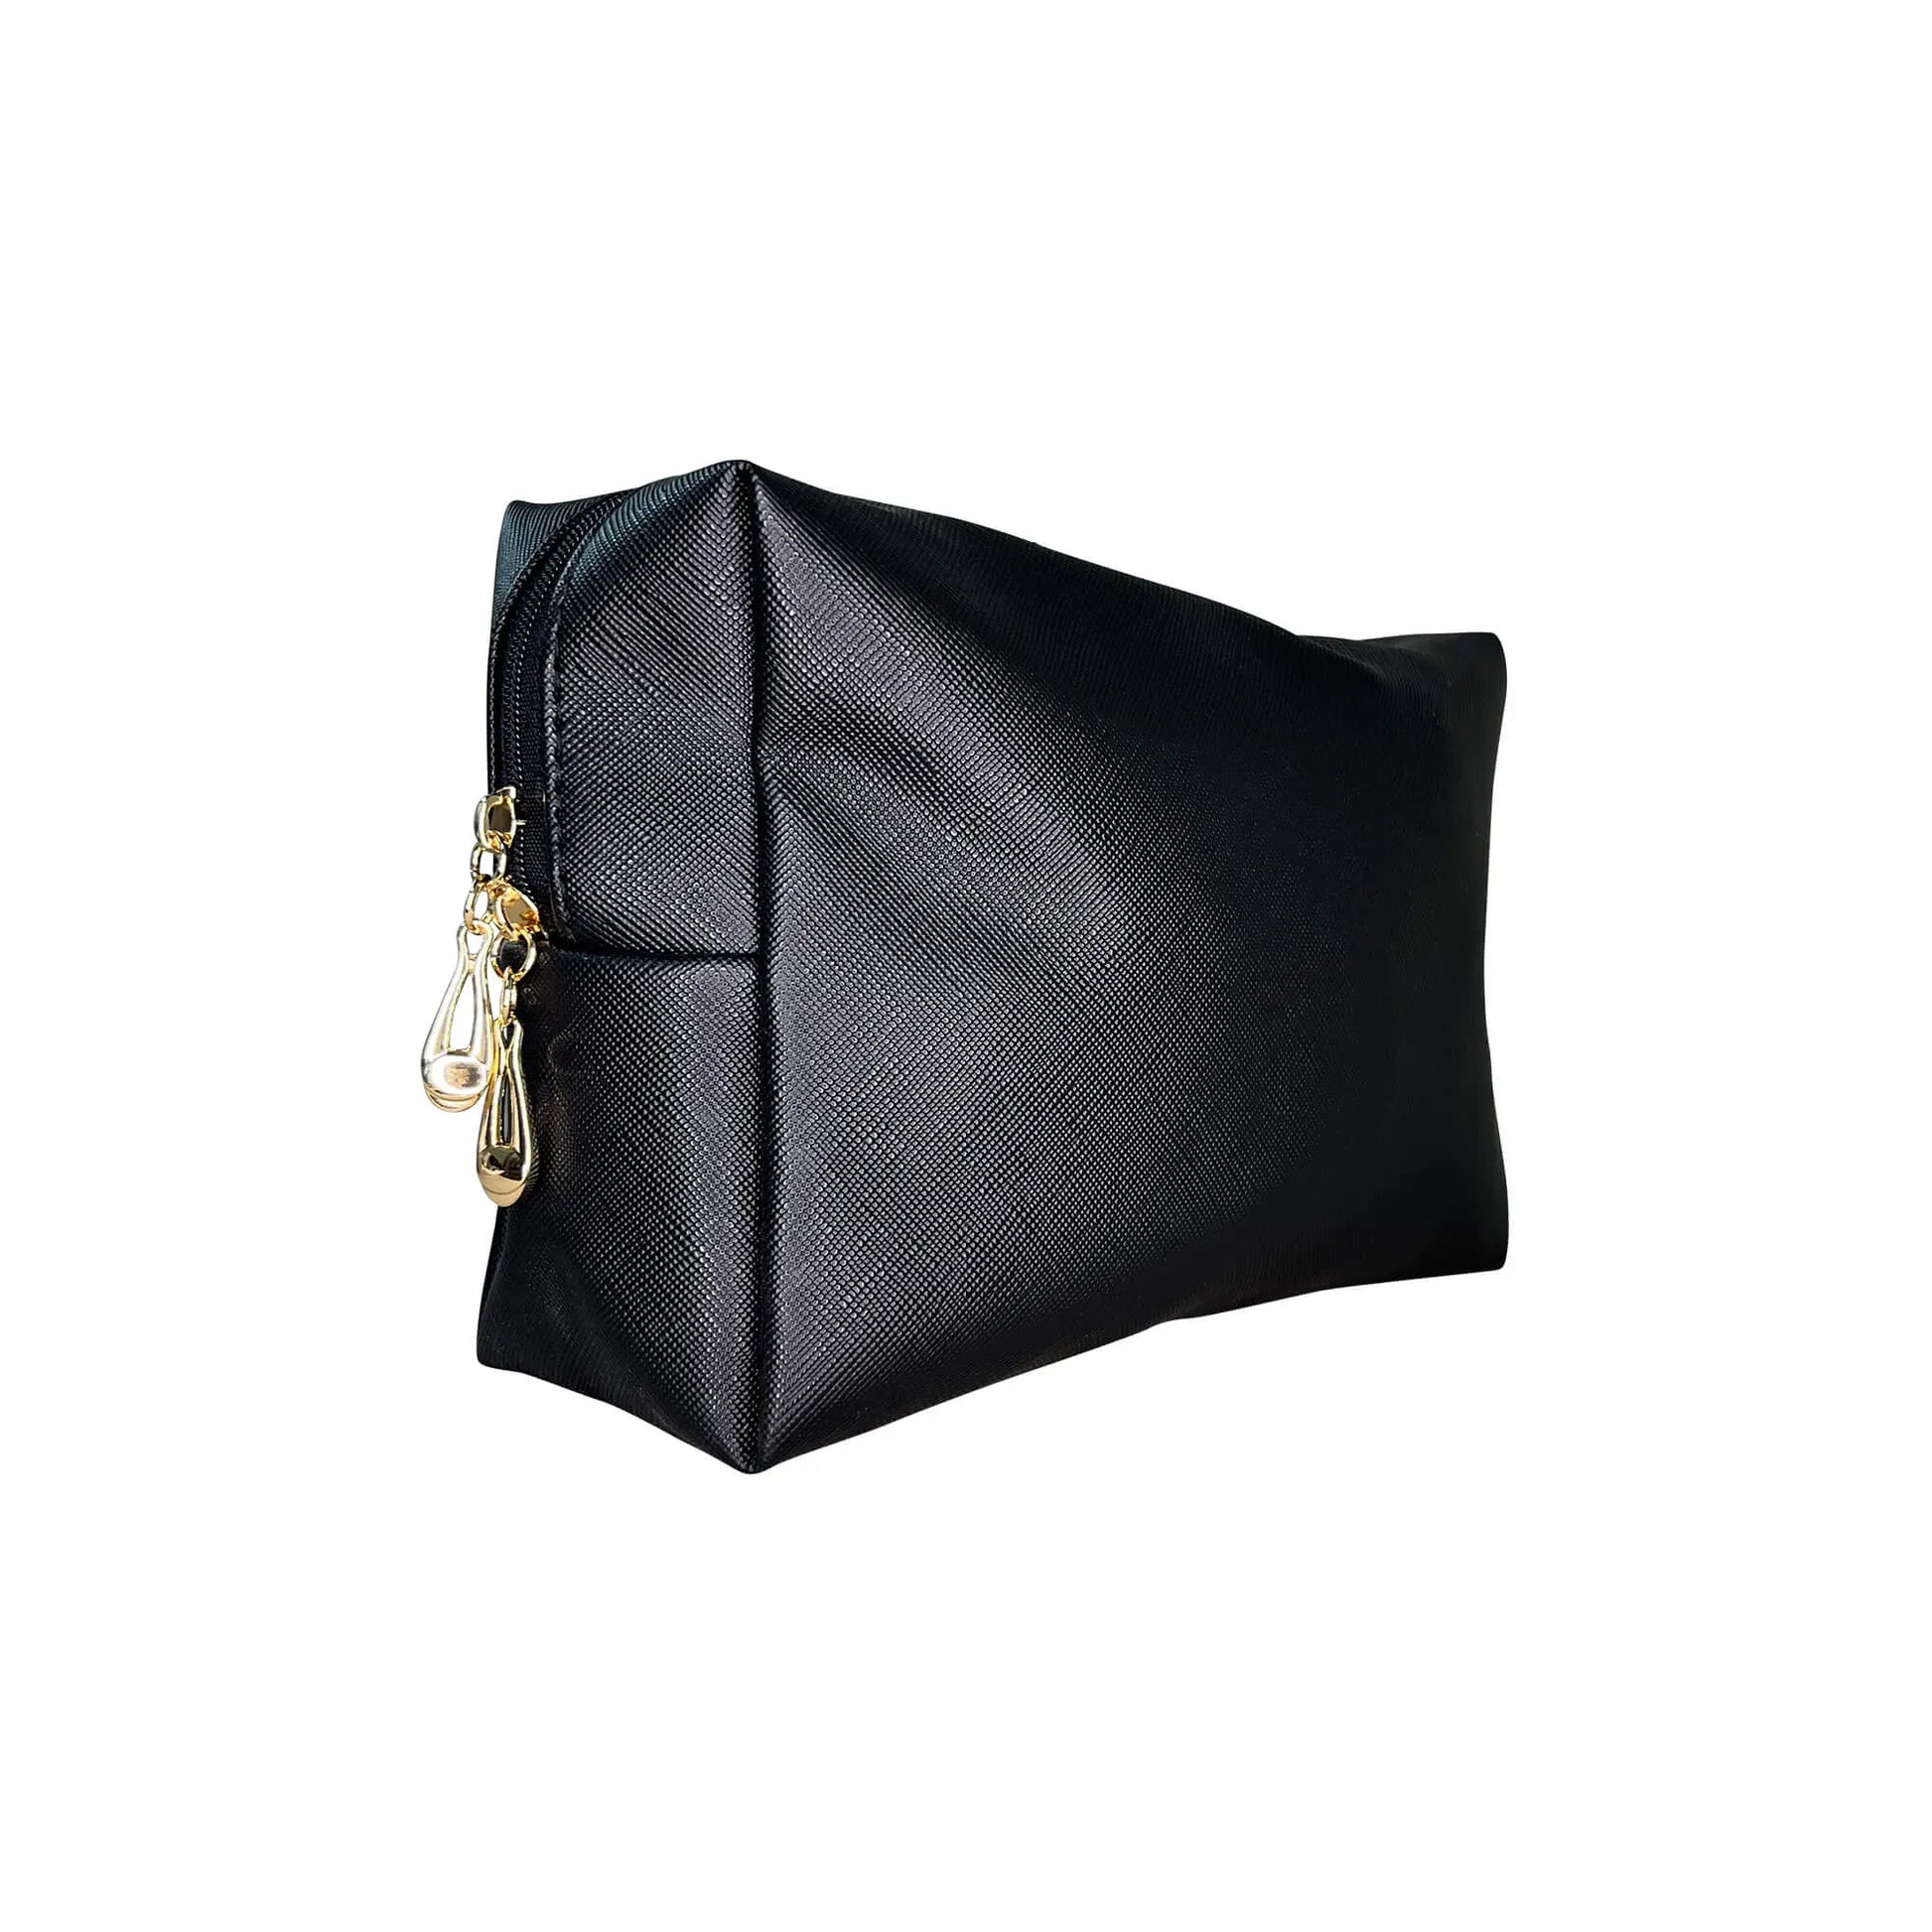 A small travel makeup bag with compartments for cosmetics and brushes. Ideal for on-the-go touch-ups.